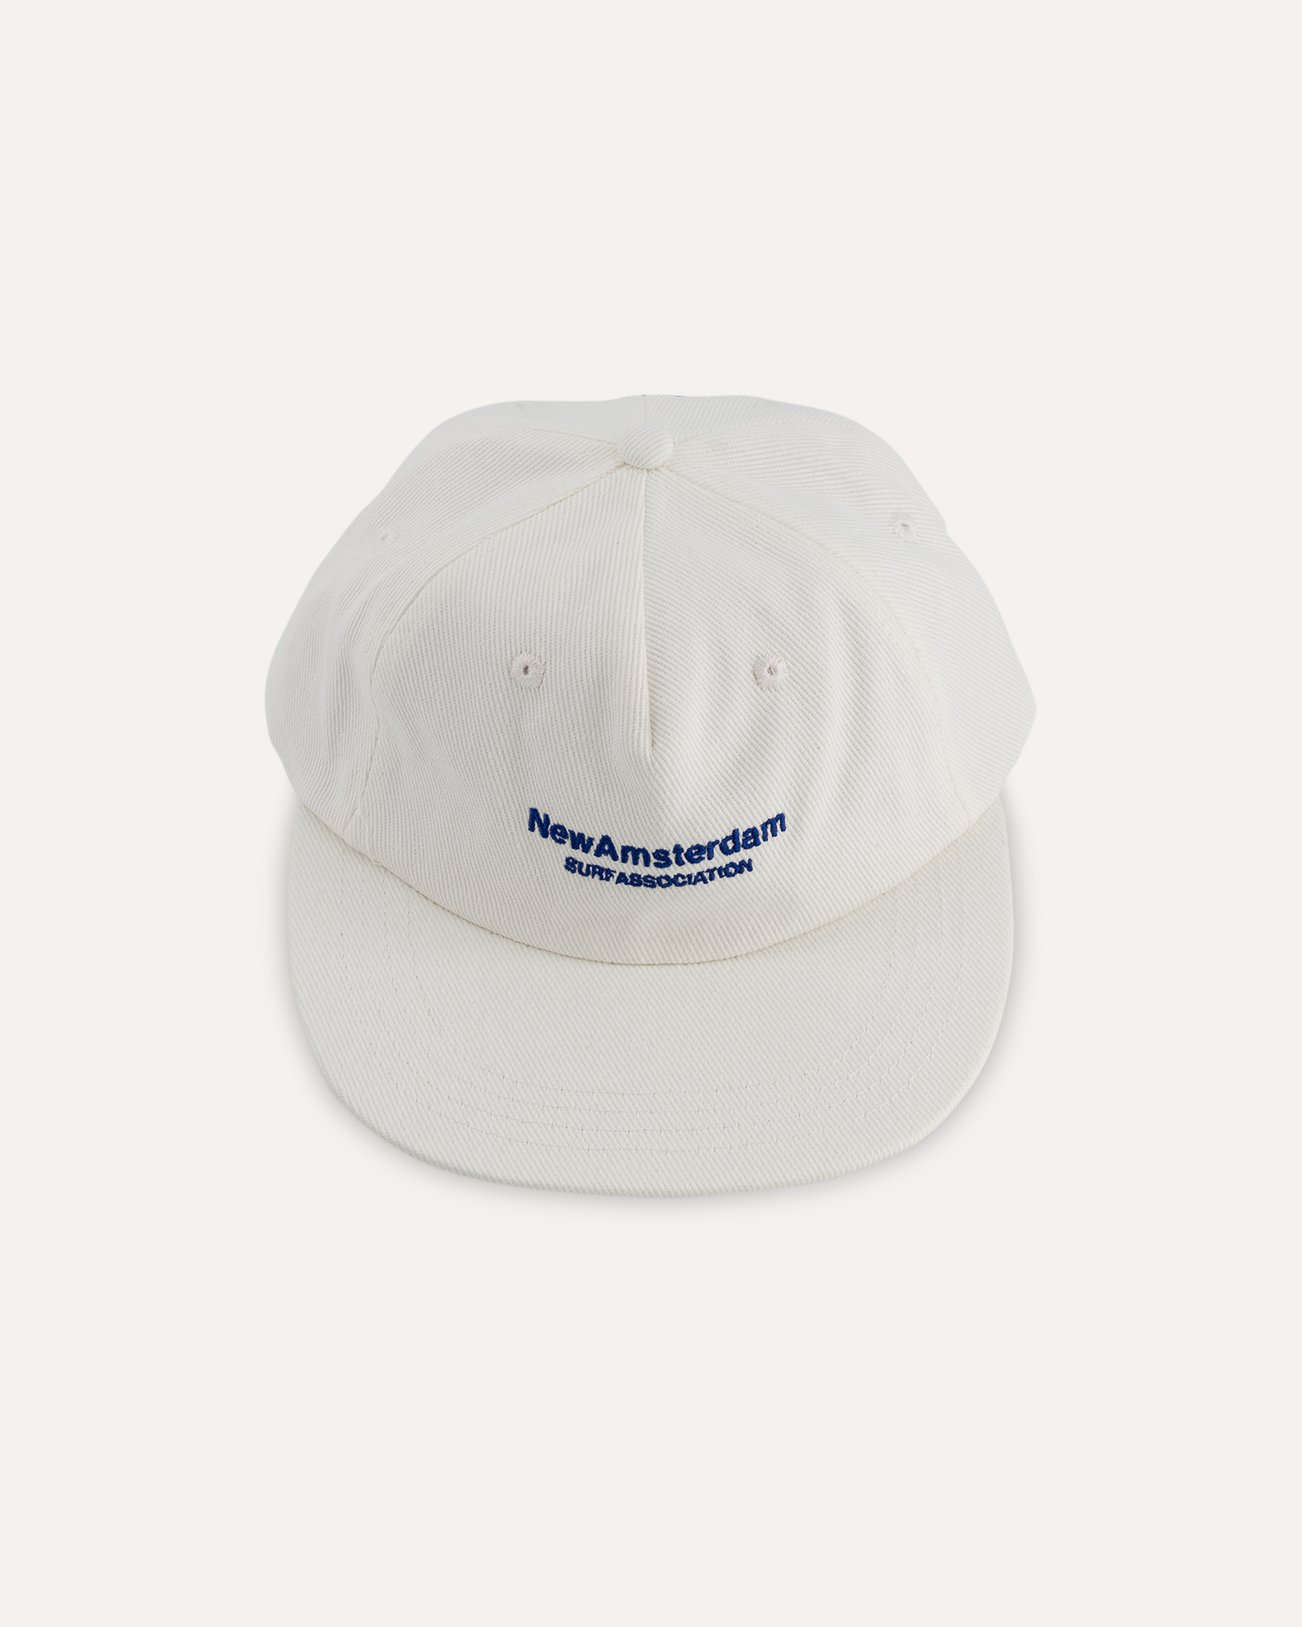 New Amsterdam Surf Association Name Cap White WIT 1